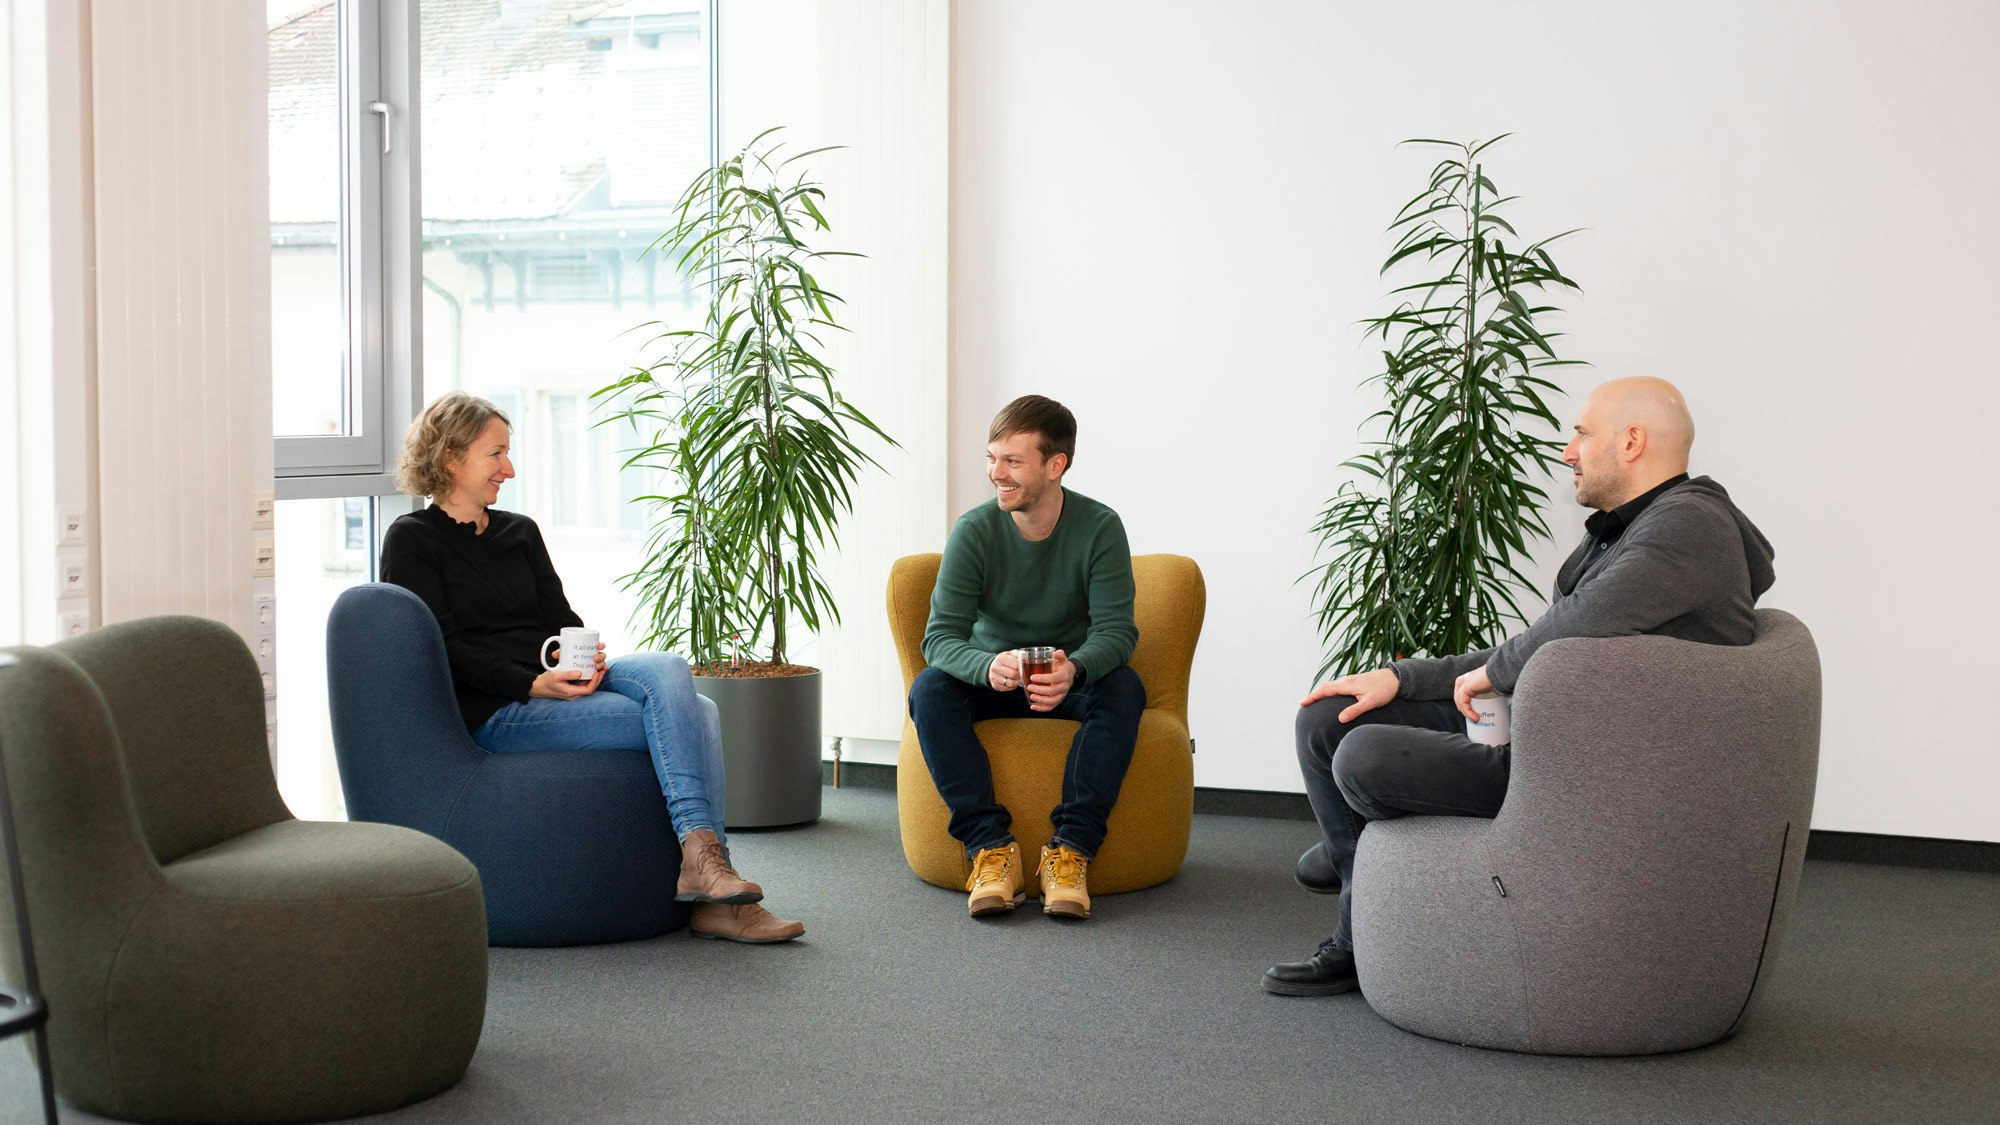 Three people sitting on comfy chairs in an office environment, surrounded by plants